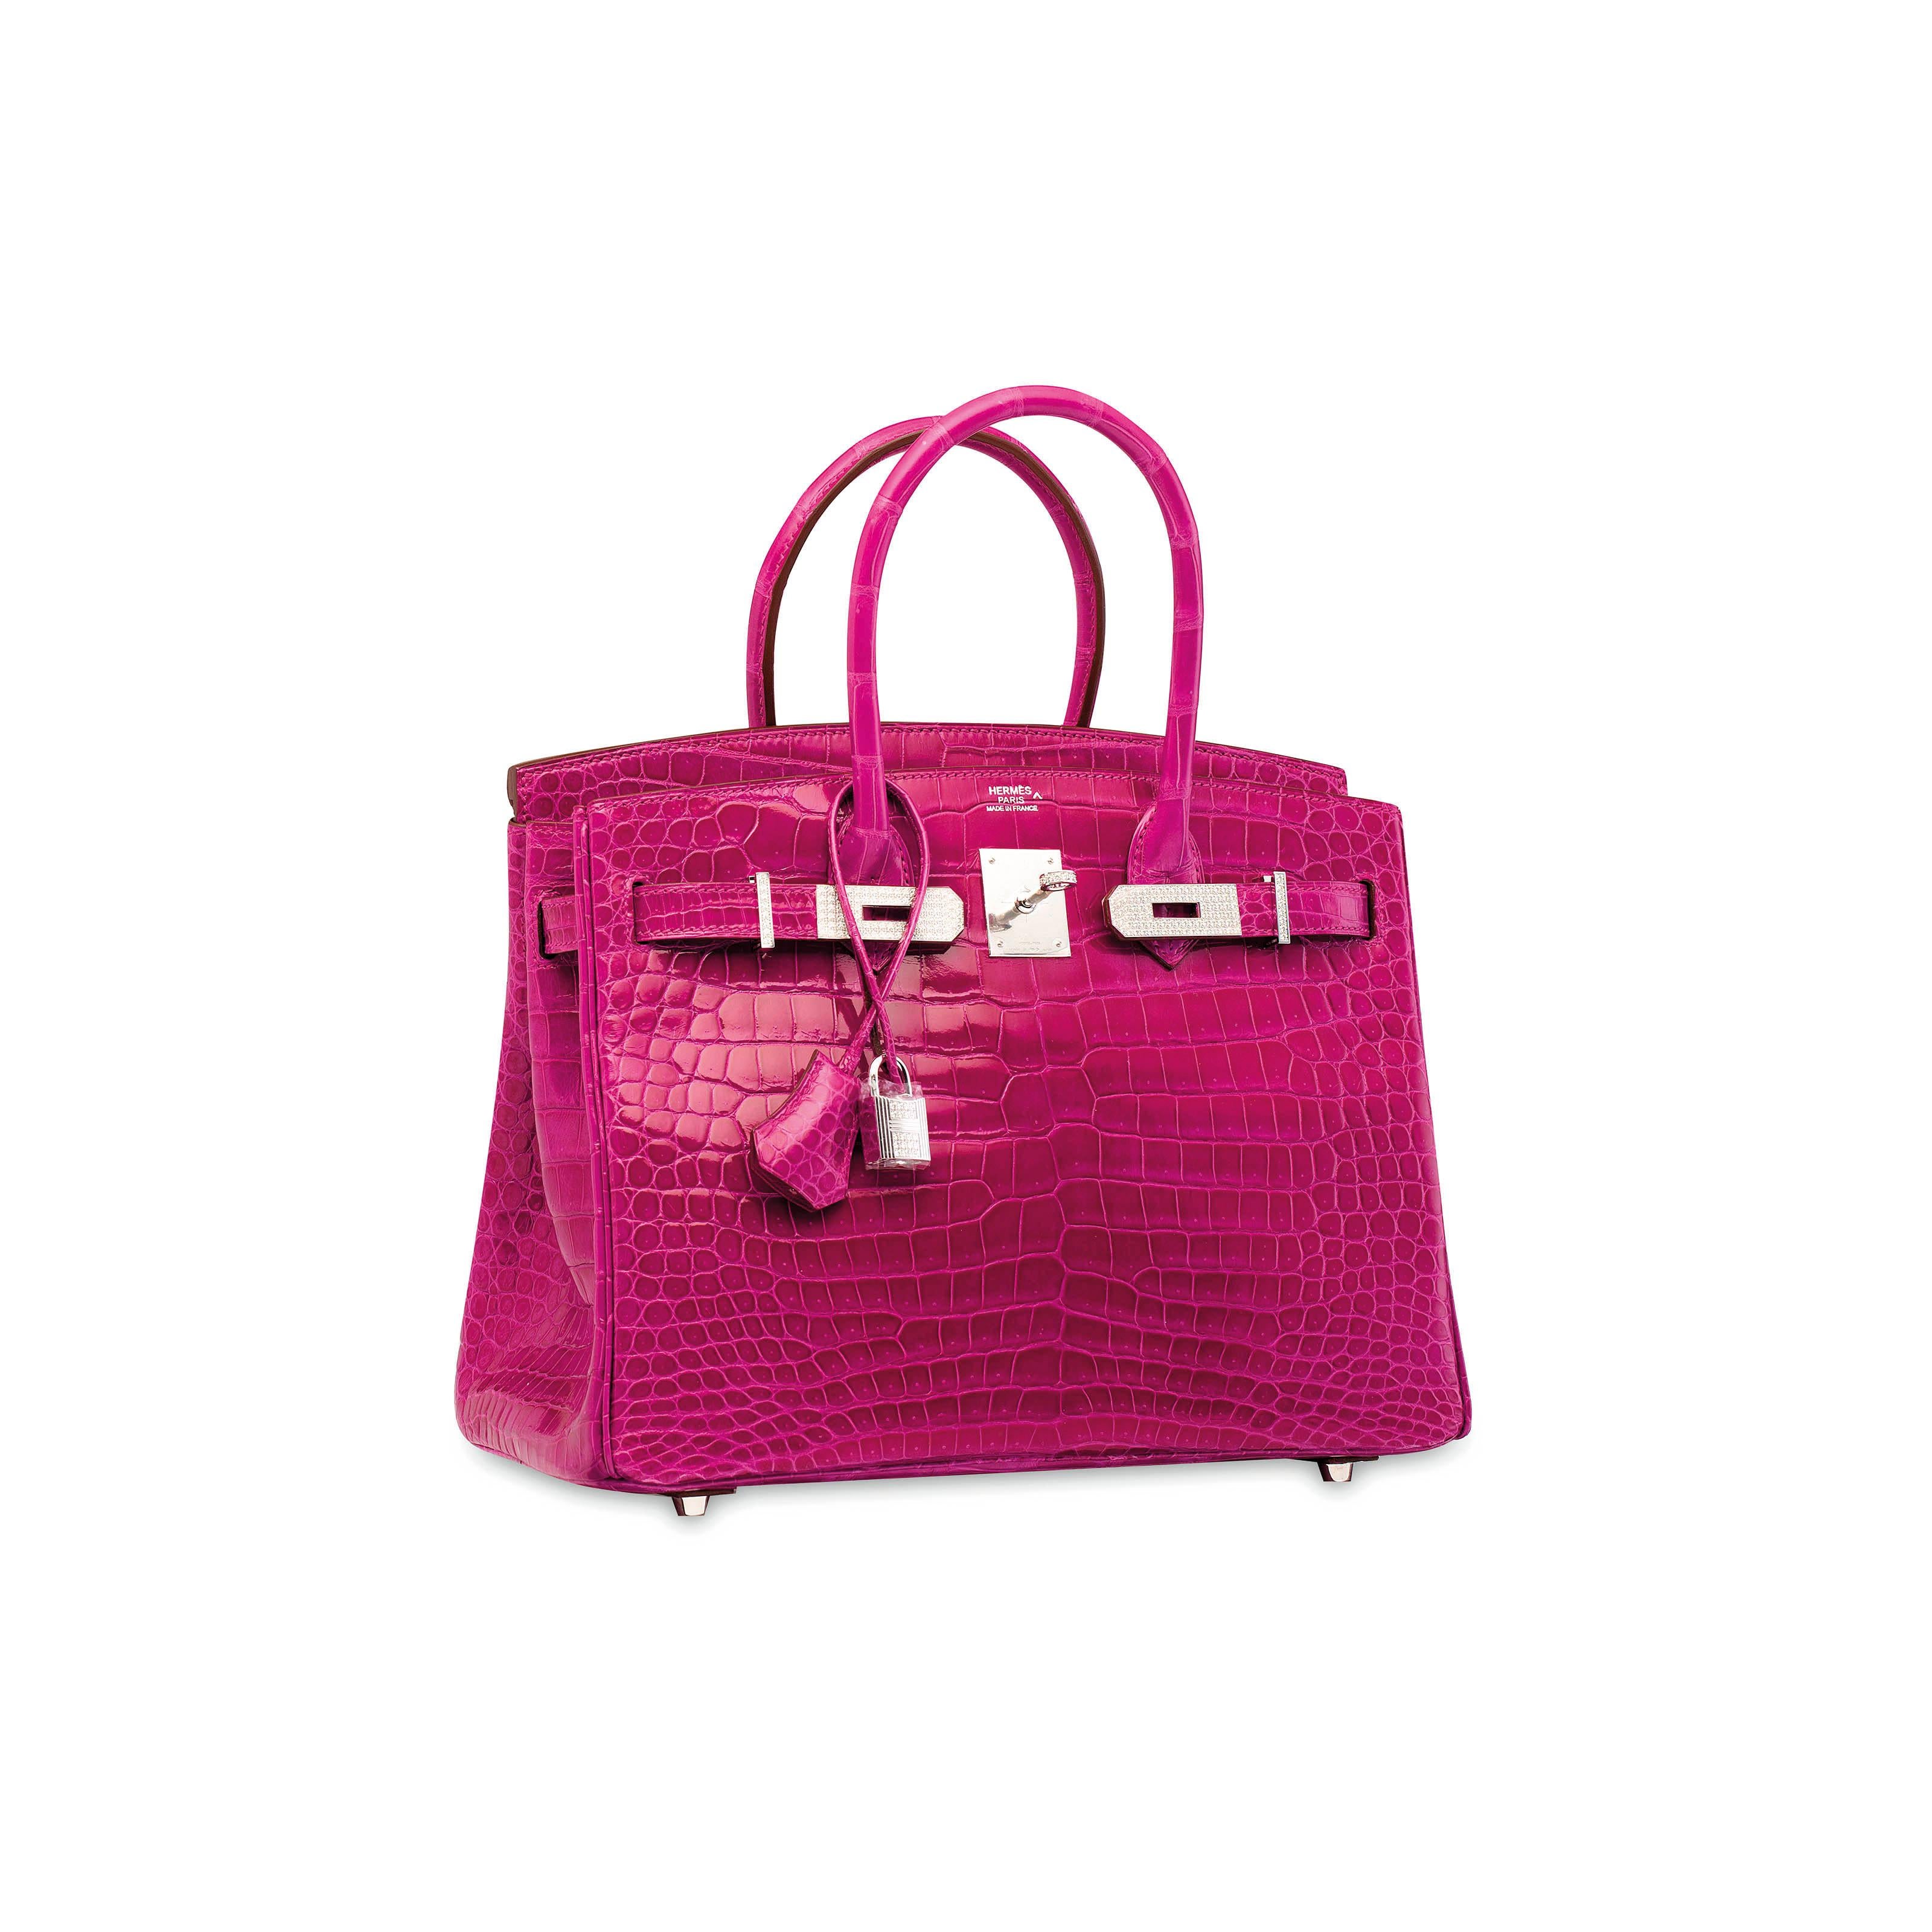 It Gets No Better Than This.

This rare Hermes Crocodile Birkin 25 bag is the ultimate status symbol for only the most discerning of Hermes collectors. Crafted of exotic crocodile skin leather, diamonds and 18Kt white gold hardware, this fuchsia